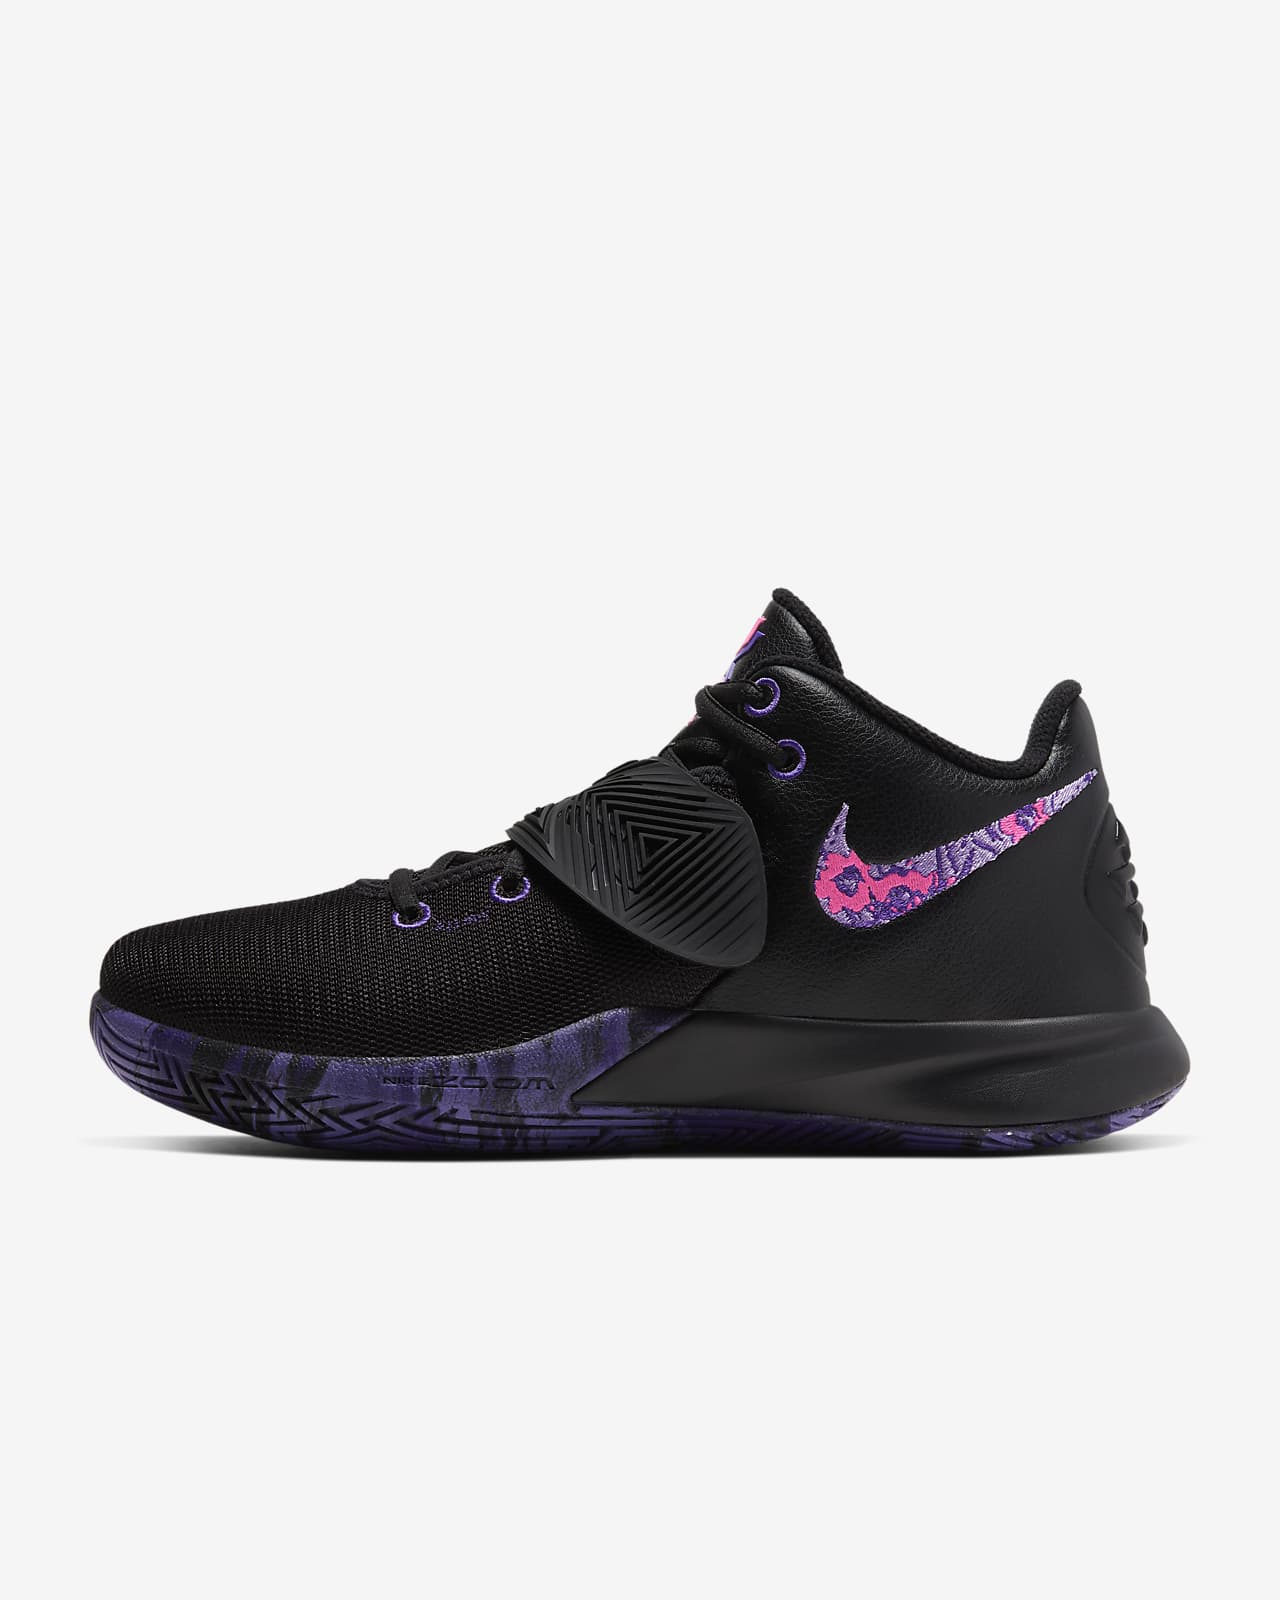 basketball shoes kyrie flytrap